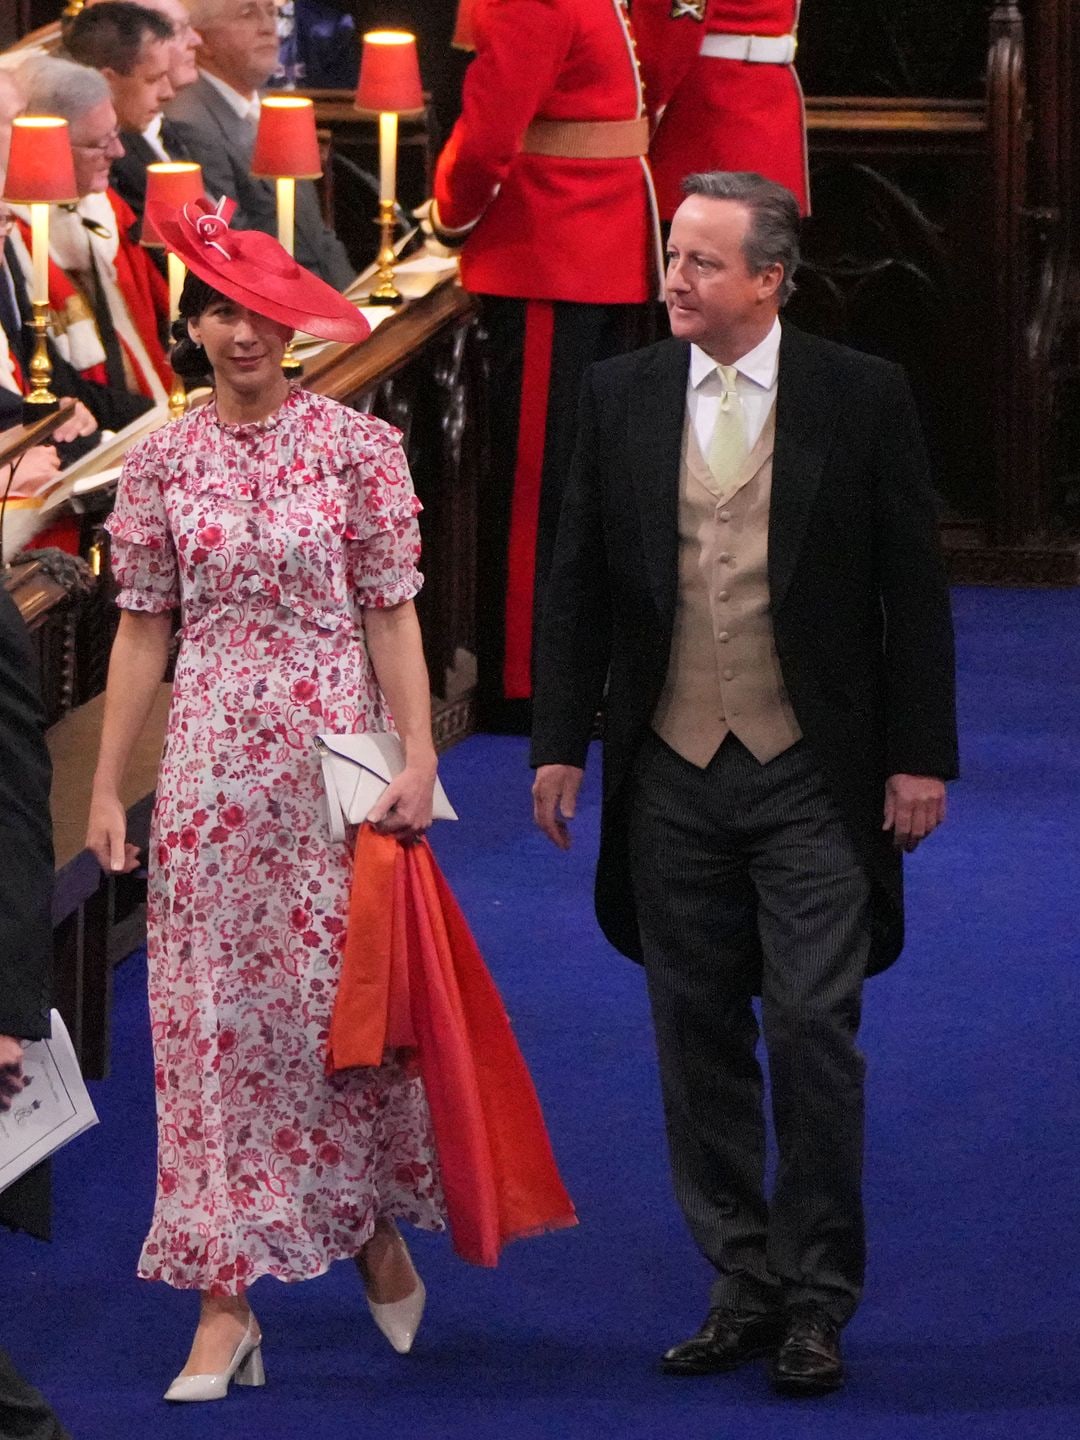 The 30 best dressed guests at King Charles’ coronation - Monika Kane